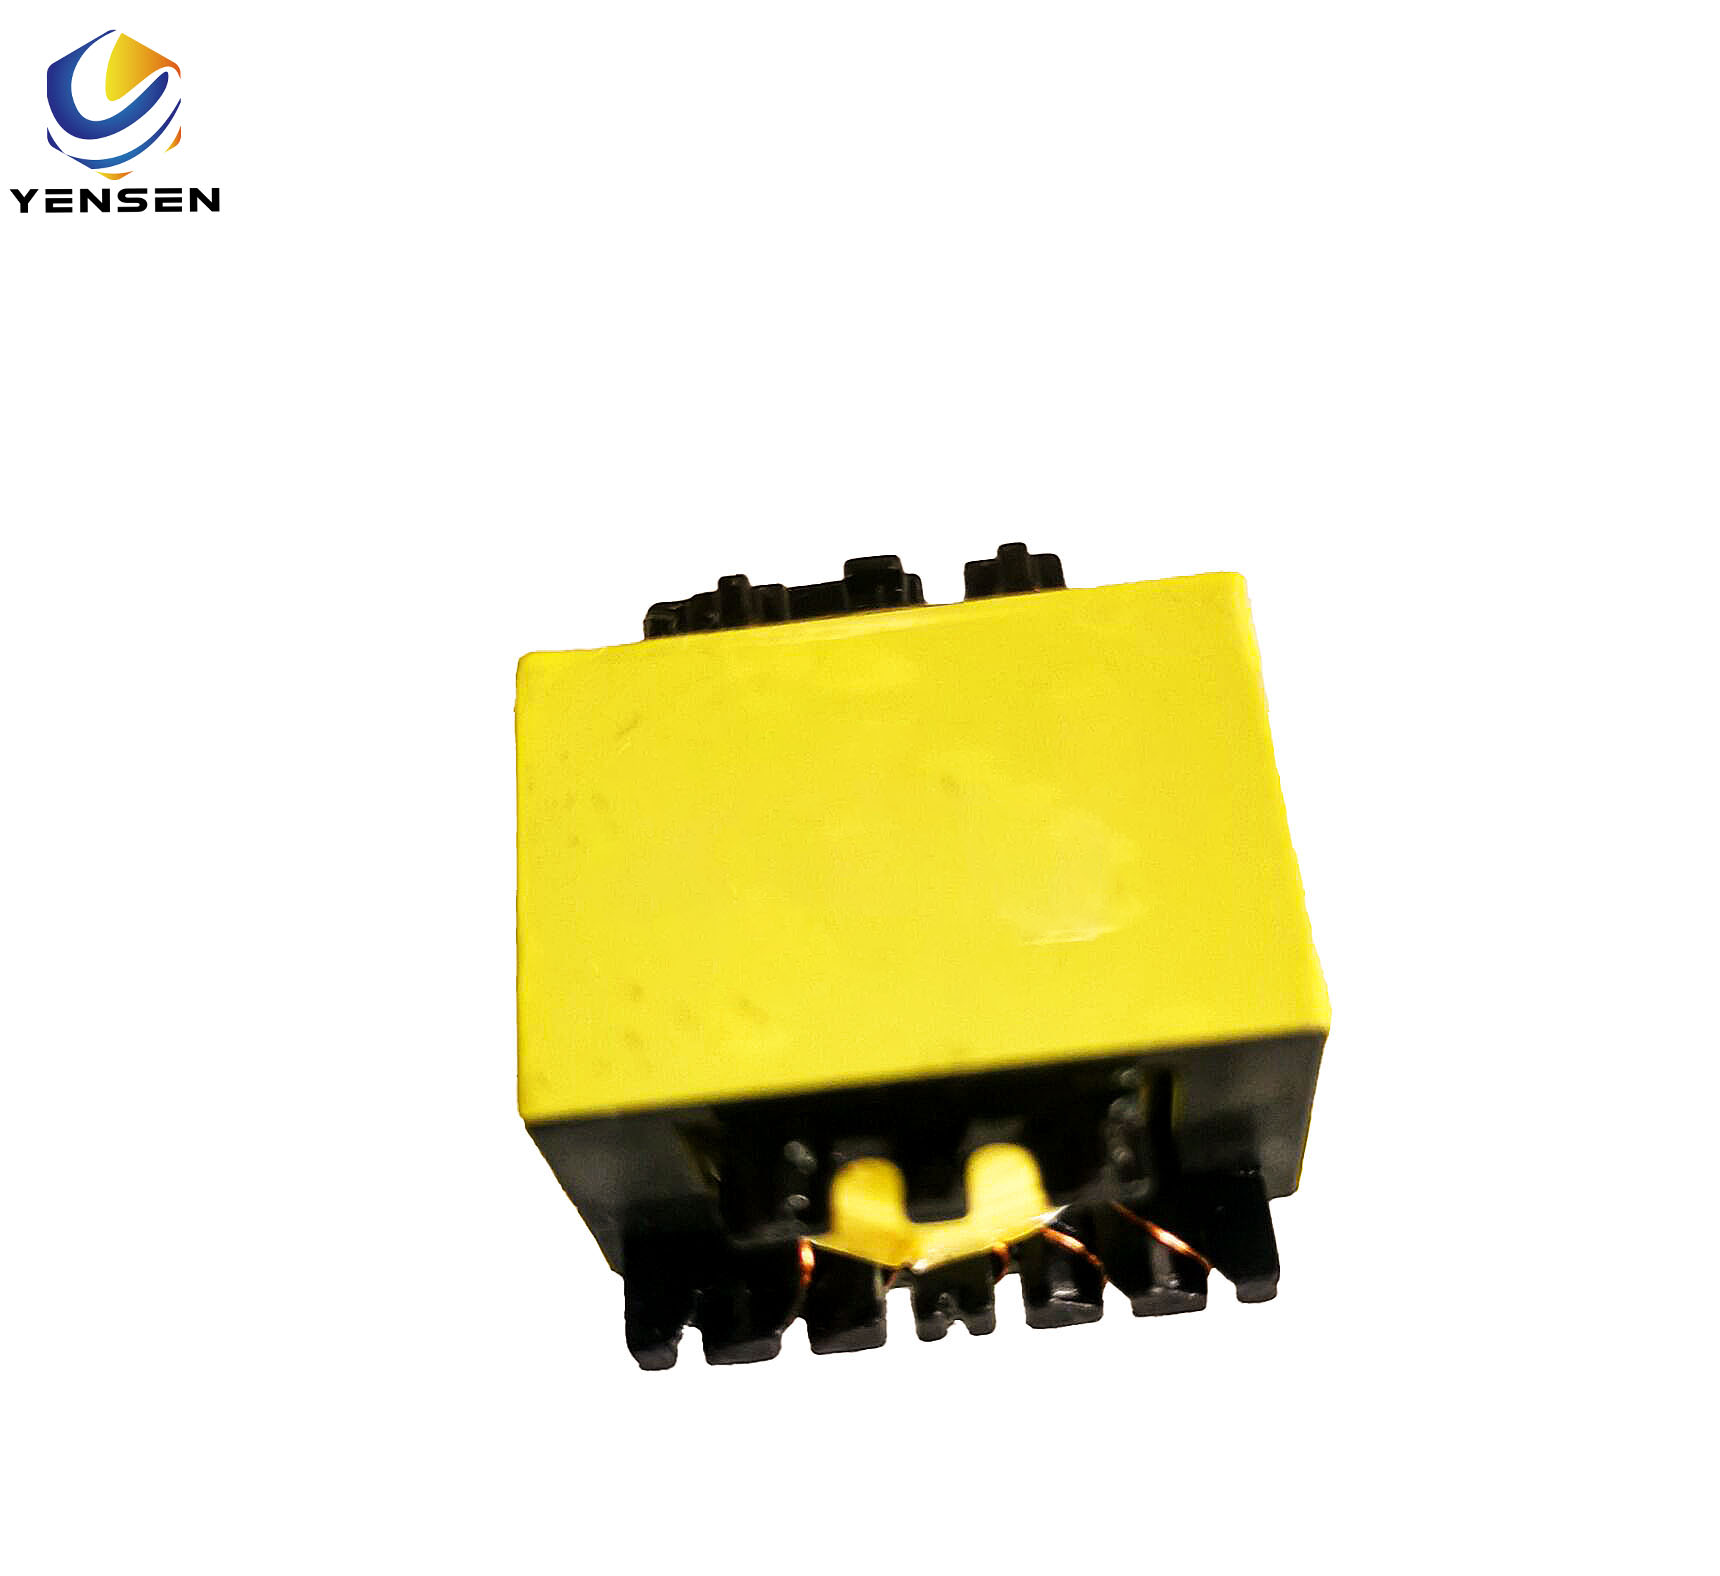 Pq2020 Core Type Electronic Flyback Current Transformer Ferrite Core Power Supply Transformer